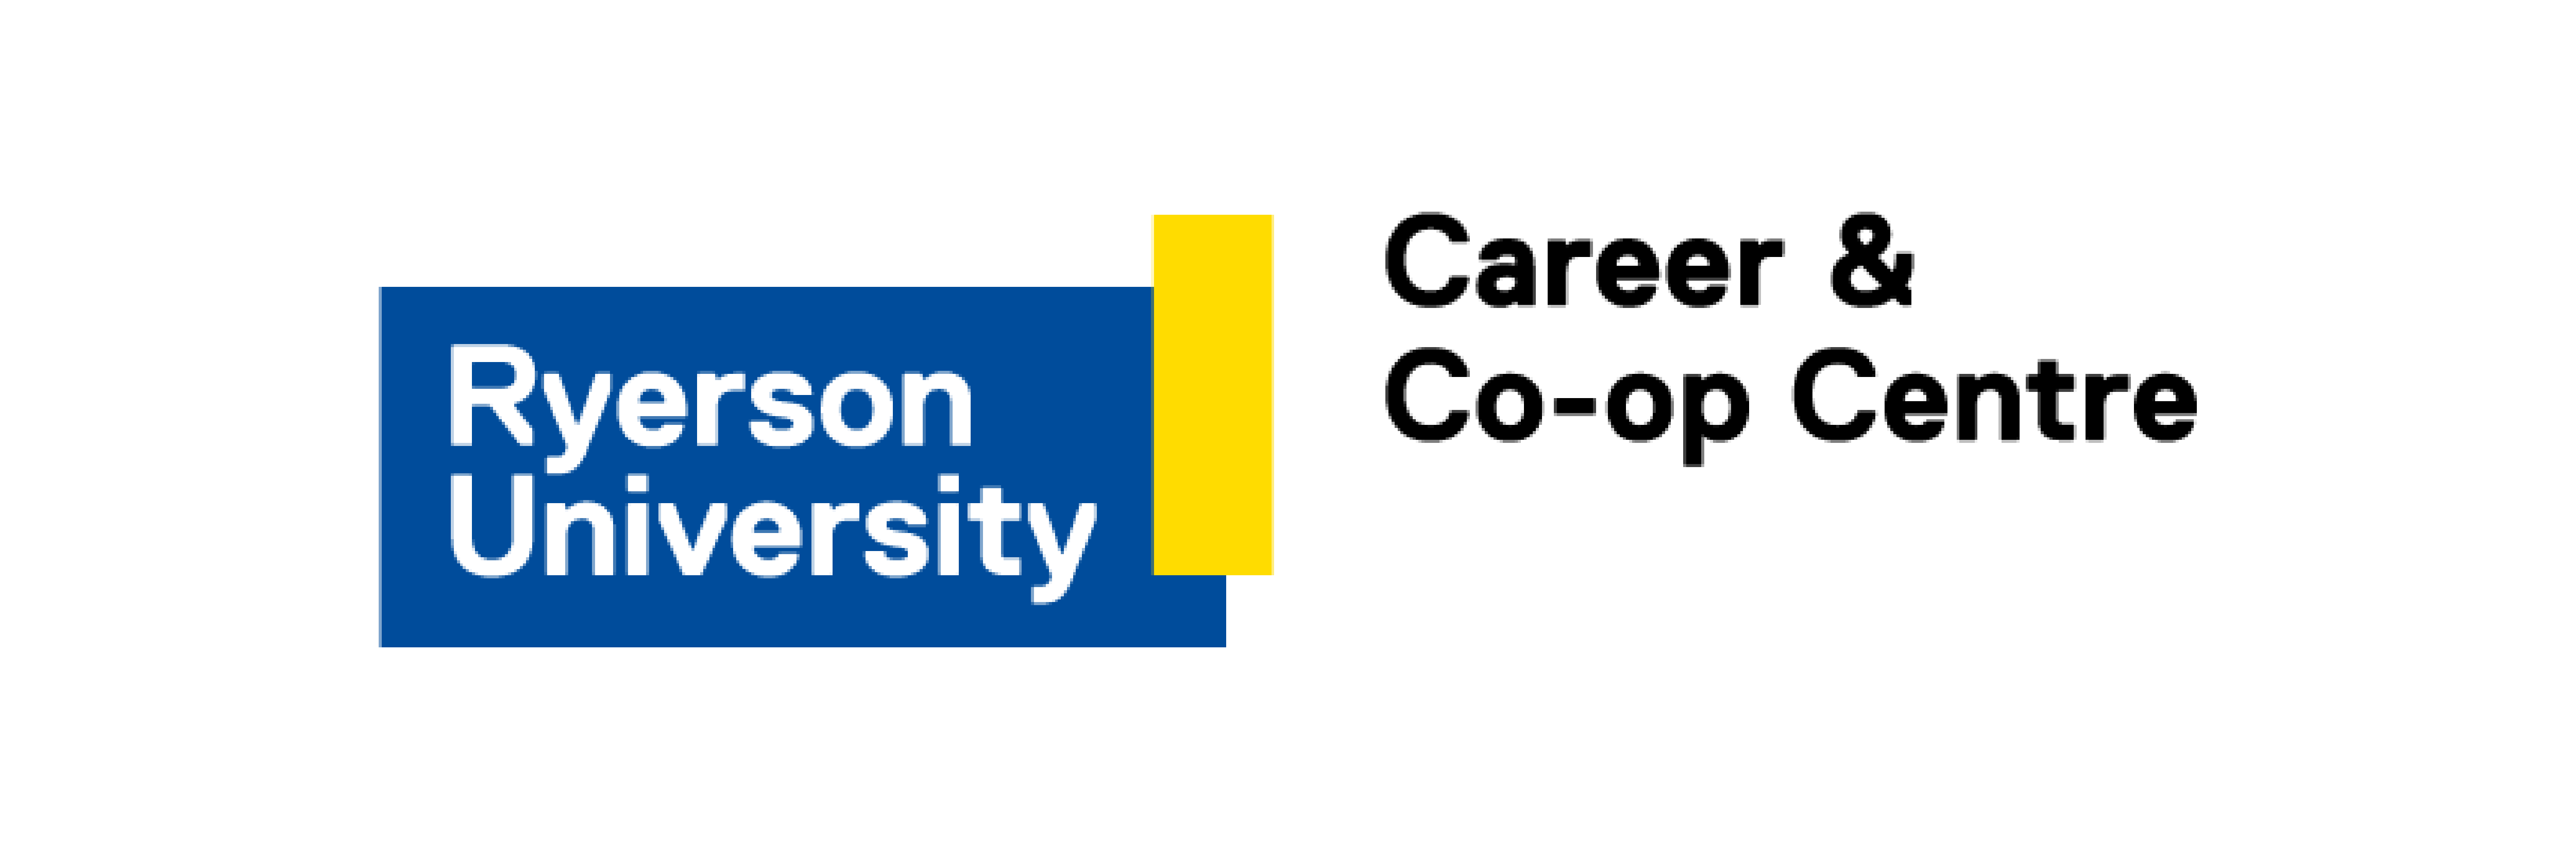 Ryerson University Career and Co-op Centre Logo